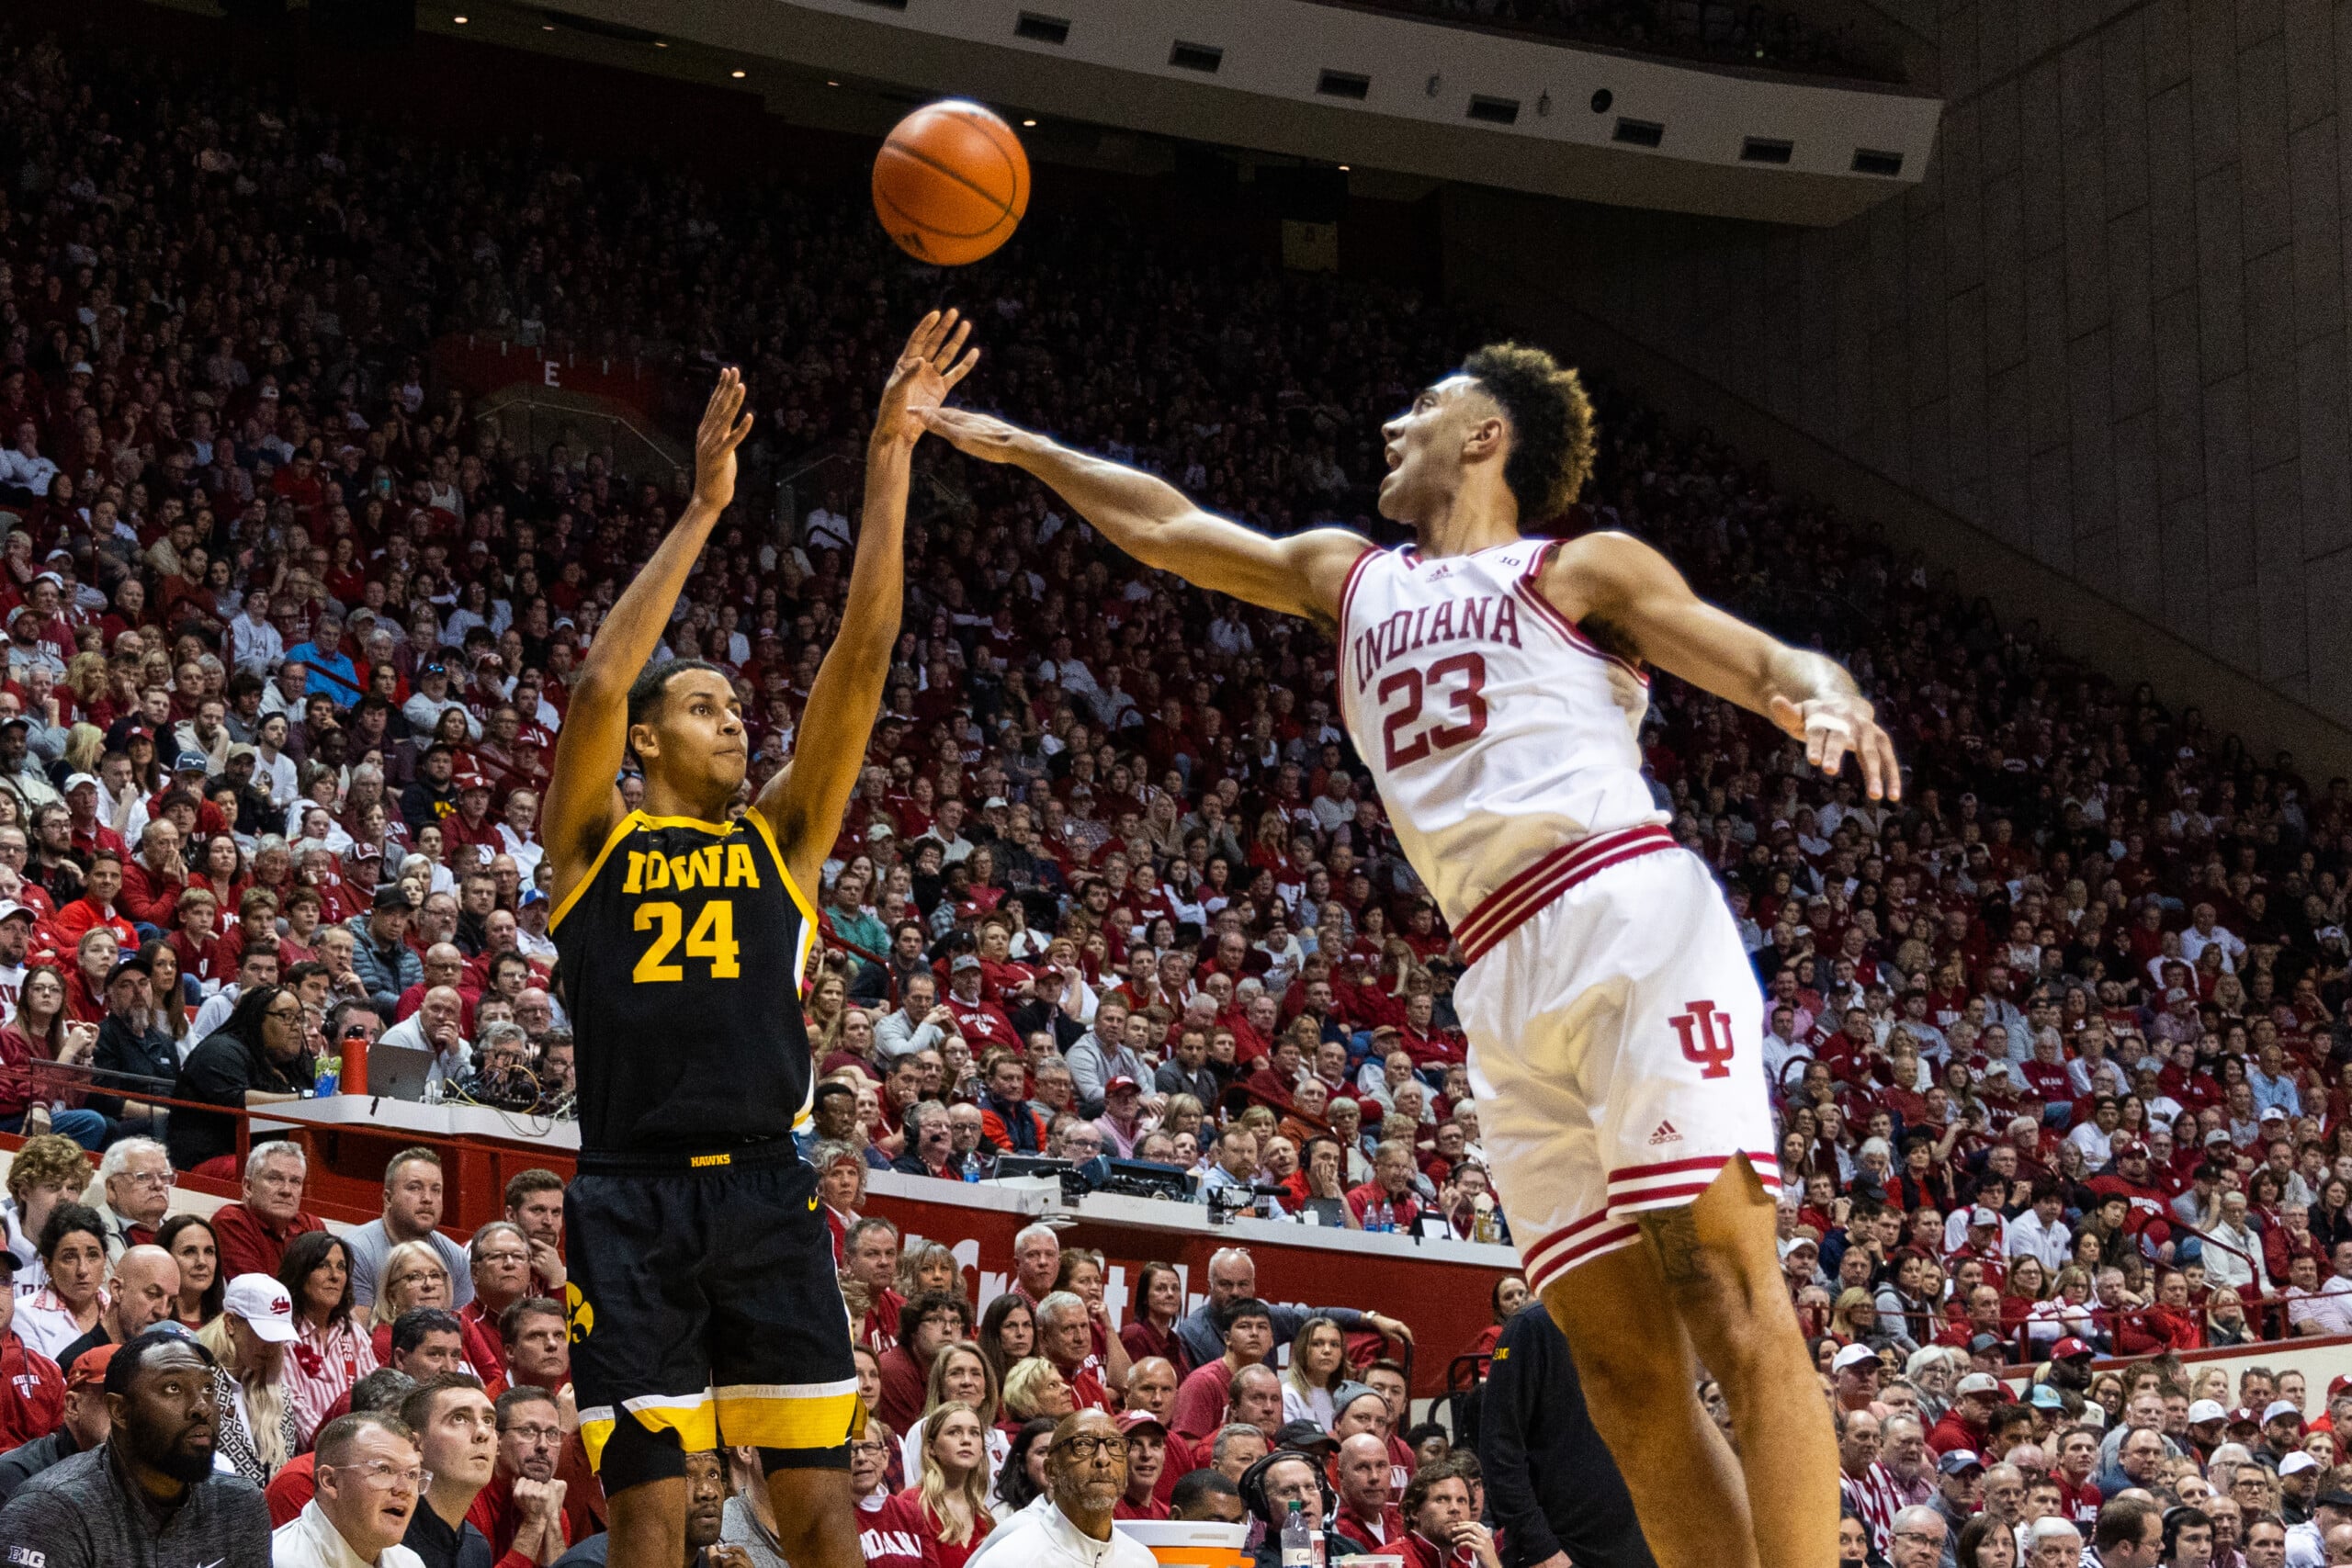 Feb 28, 2023; Bloomington, Indiana, USA; Iowa Hawkeyes forward Kris Murray (24) shoots the ball while Indiana Hoosiers forward Trayce Jackson-Davis (23) defends in the second half at Simon Skjodt Assembly Hall.